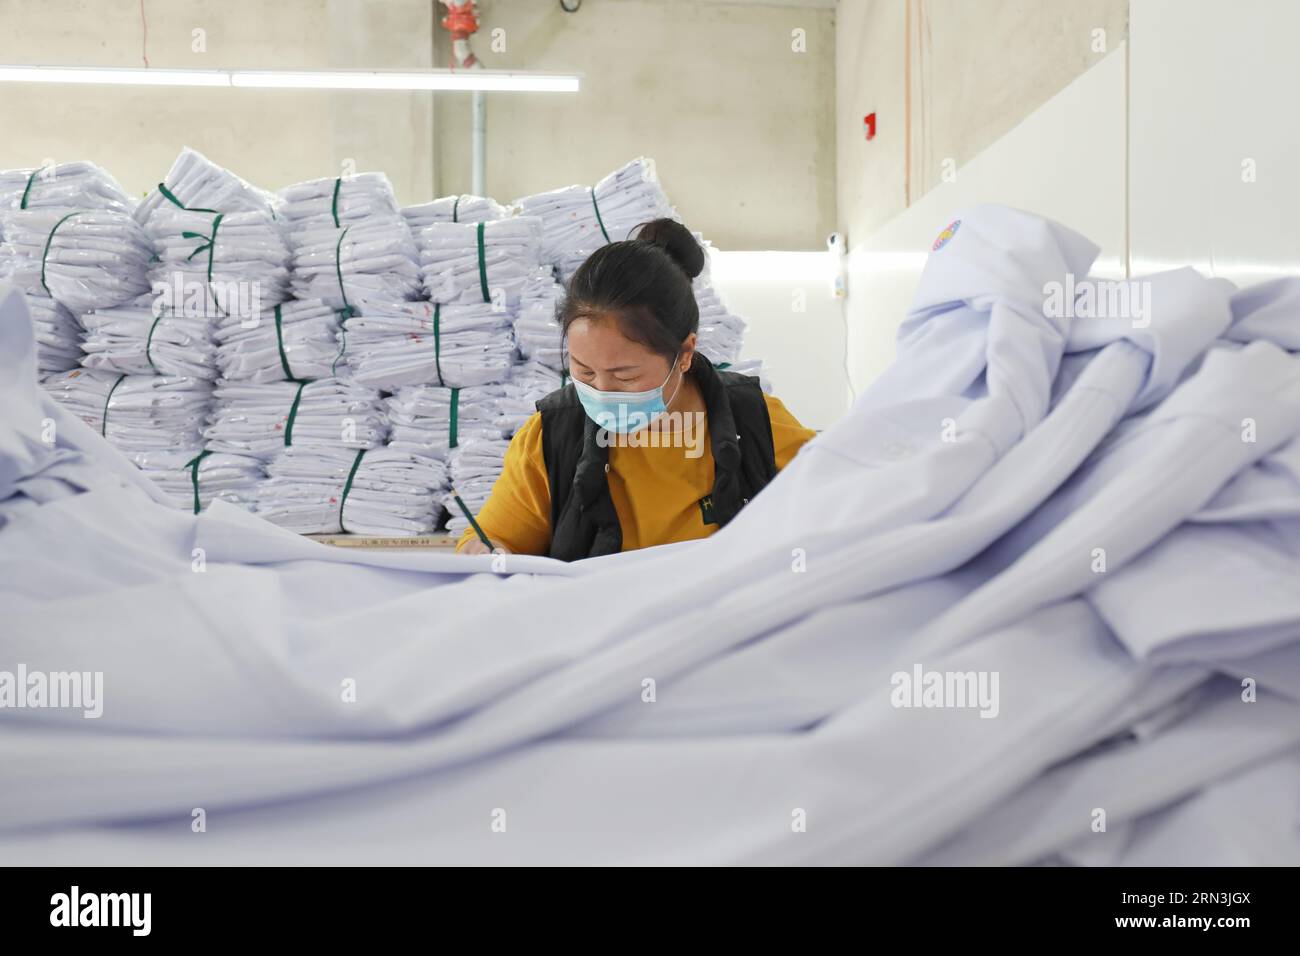 LUANNAN COUNTY, Hebei Province, China - April 8, 2020: The workers are busy on the production line in a garment factory. Stock Photo